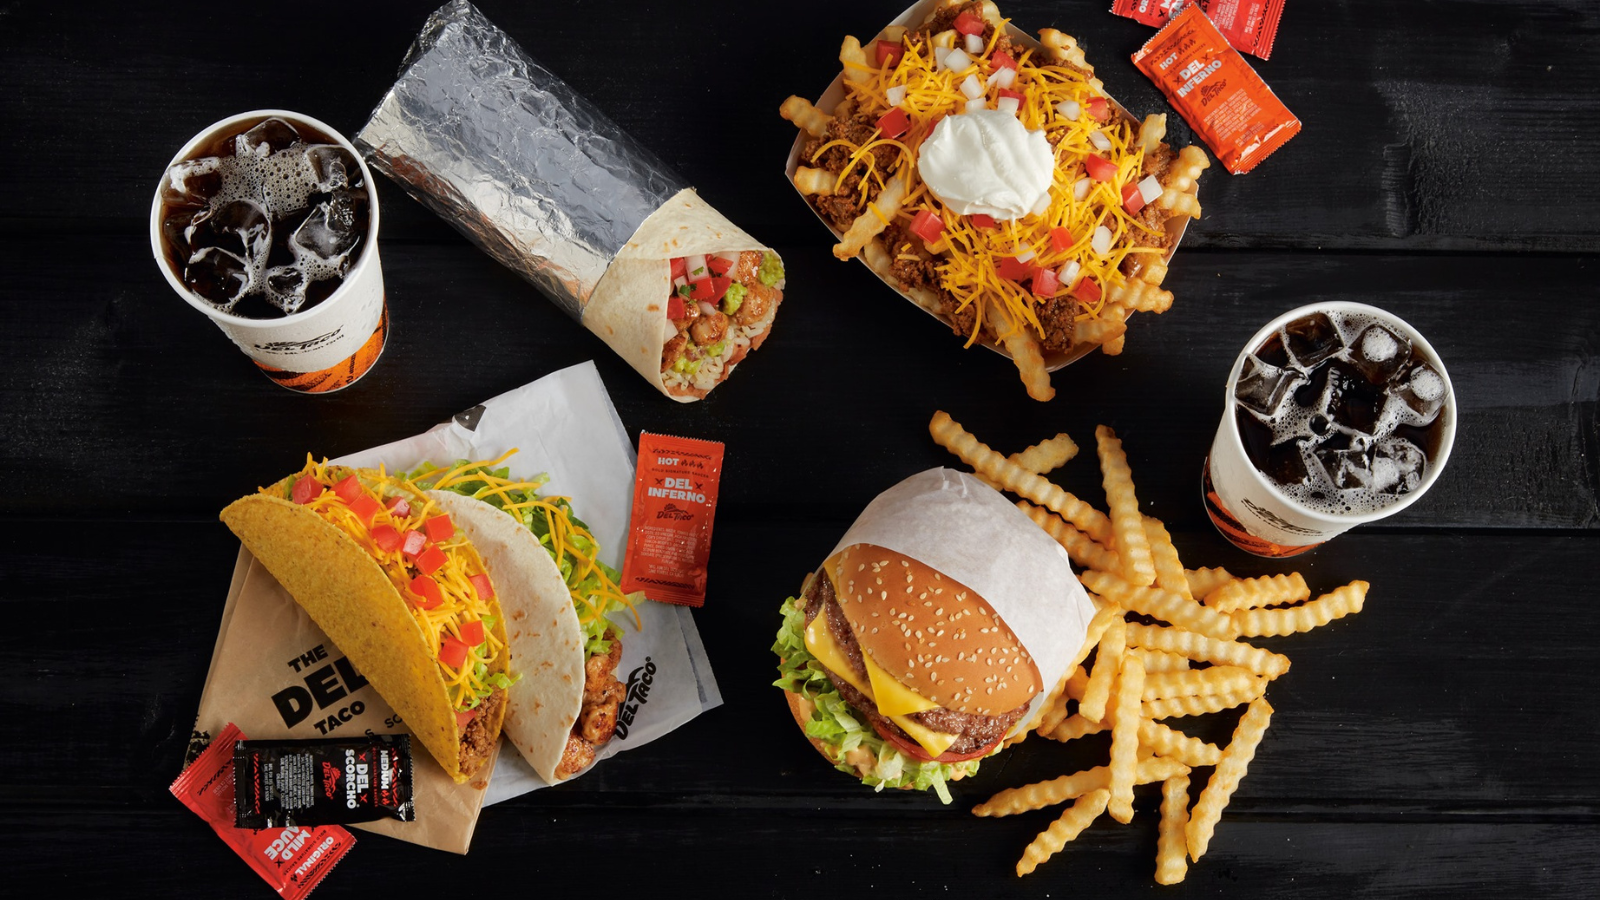 Does Del Taco Offer Non-Traditional Franchising